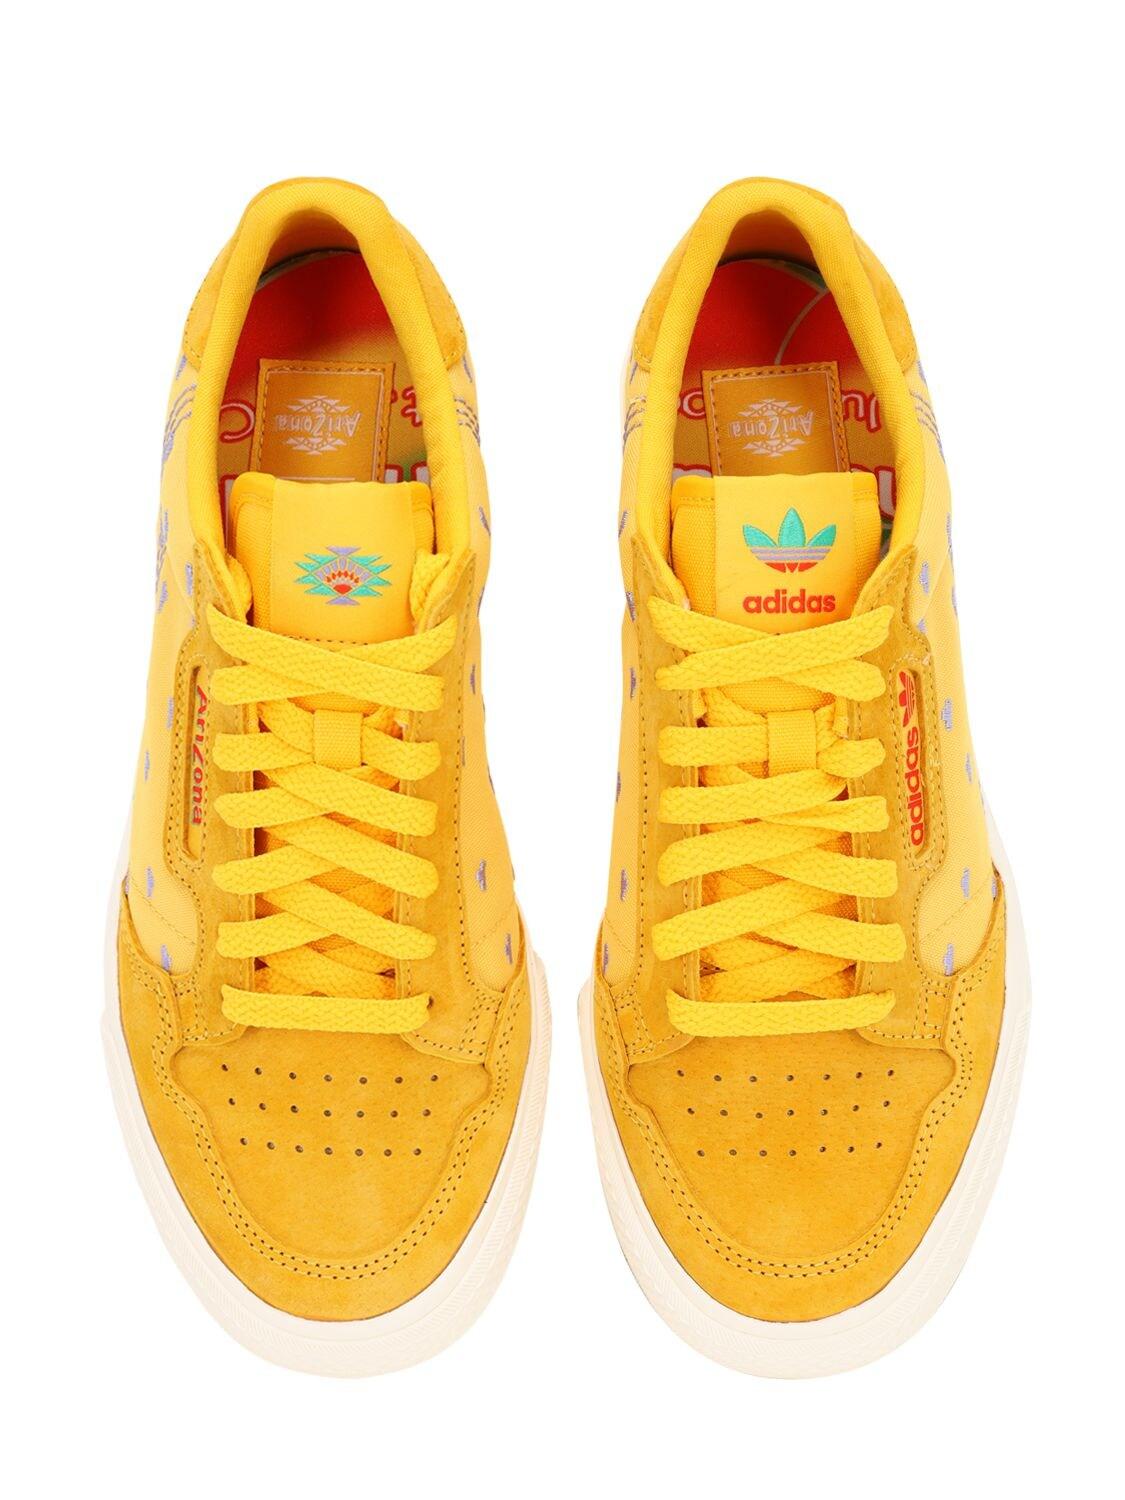 adidas Originals Continental 80 Vulc Trainers in Yellow | Lyst UK